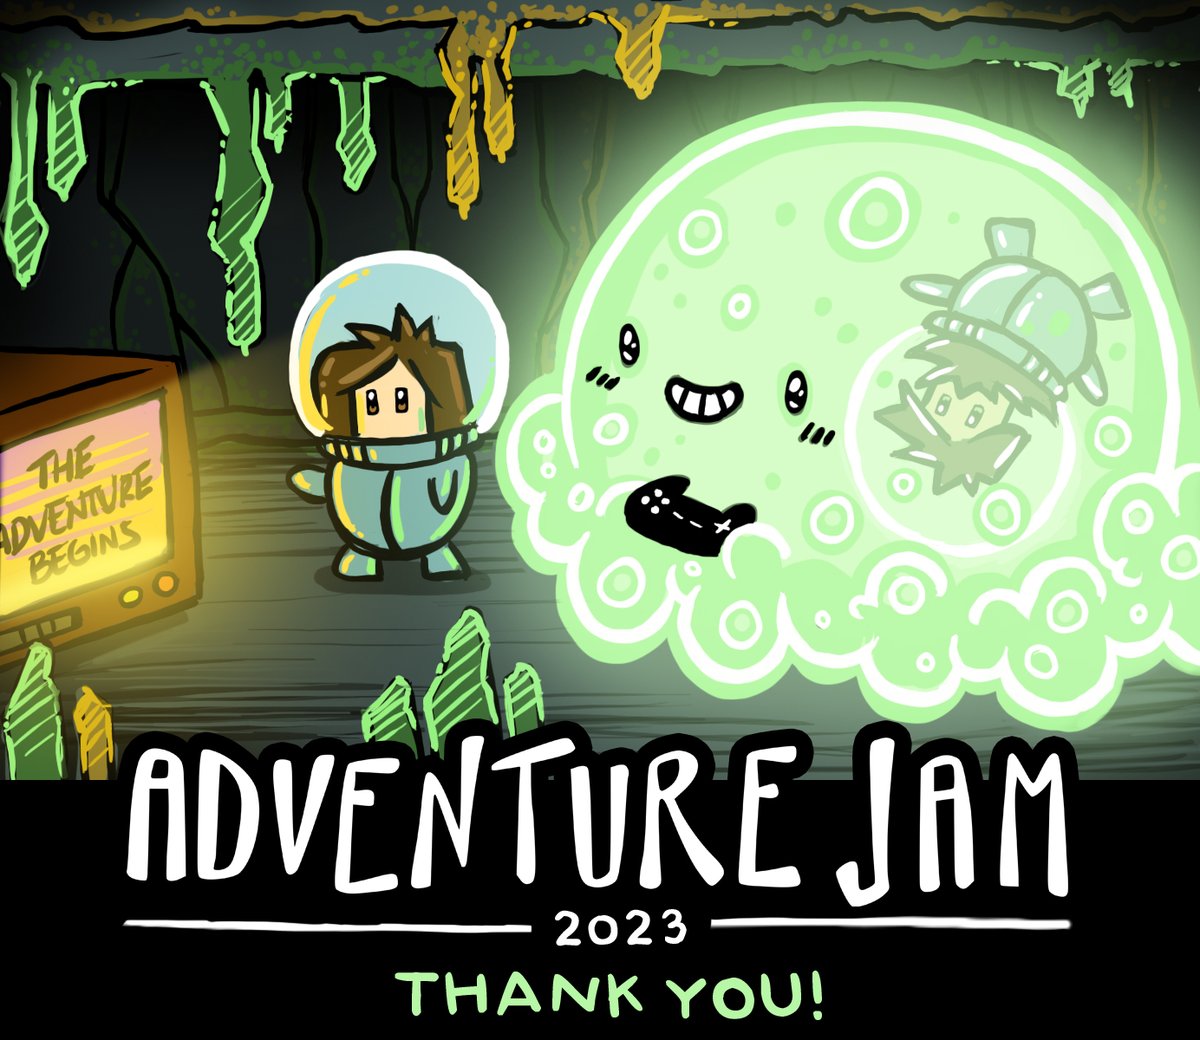 #AdvJam2023 submission time is over!

We hope that you've had a wonderful time participating - whether you worked on a game, used the time to learn some new skills, or cheered on other participants from the sidelines.

Thank you all for participating 💕  itch.io/jam/advjam2023